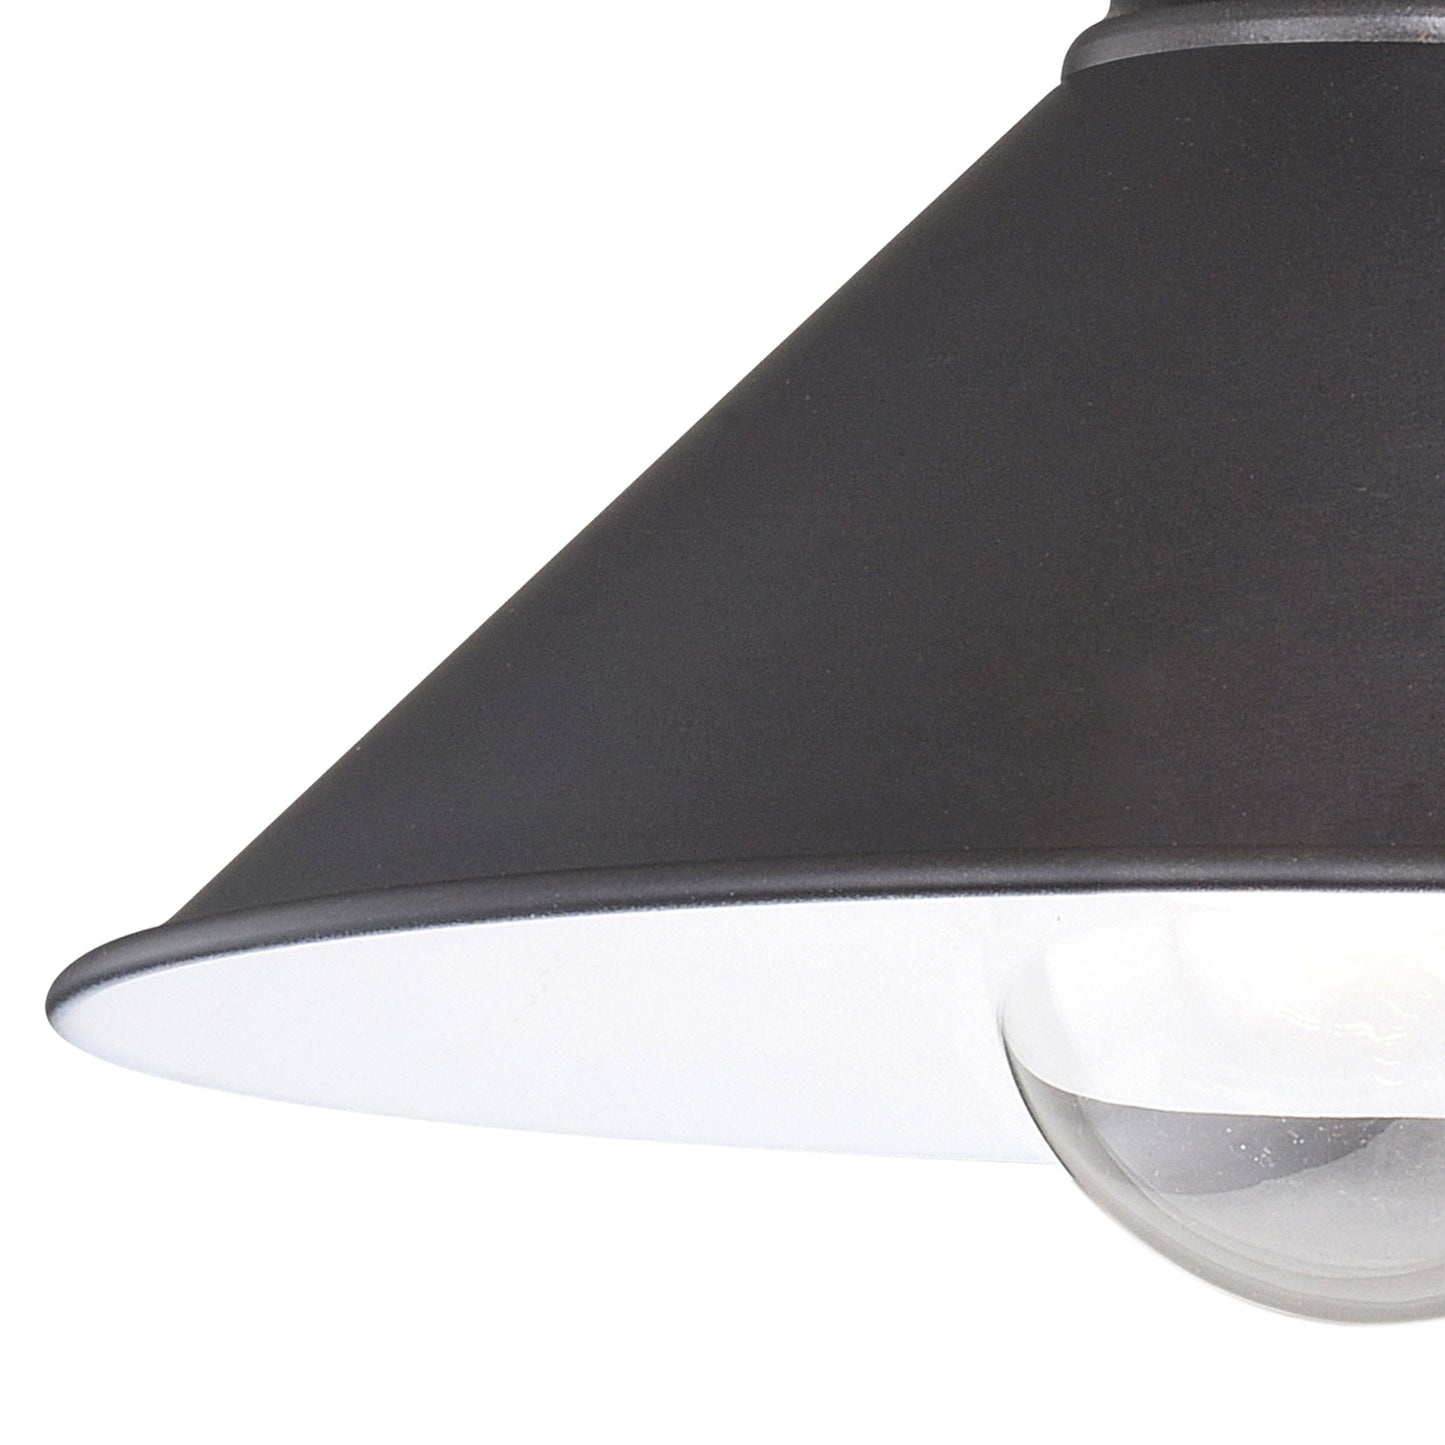 Vaxcel Akron 18" 2-Light Oil Rubbed Bronze and Matte White Vanity Light with Metal Shade